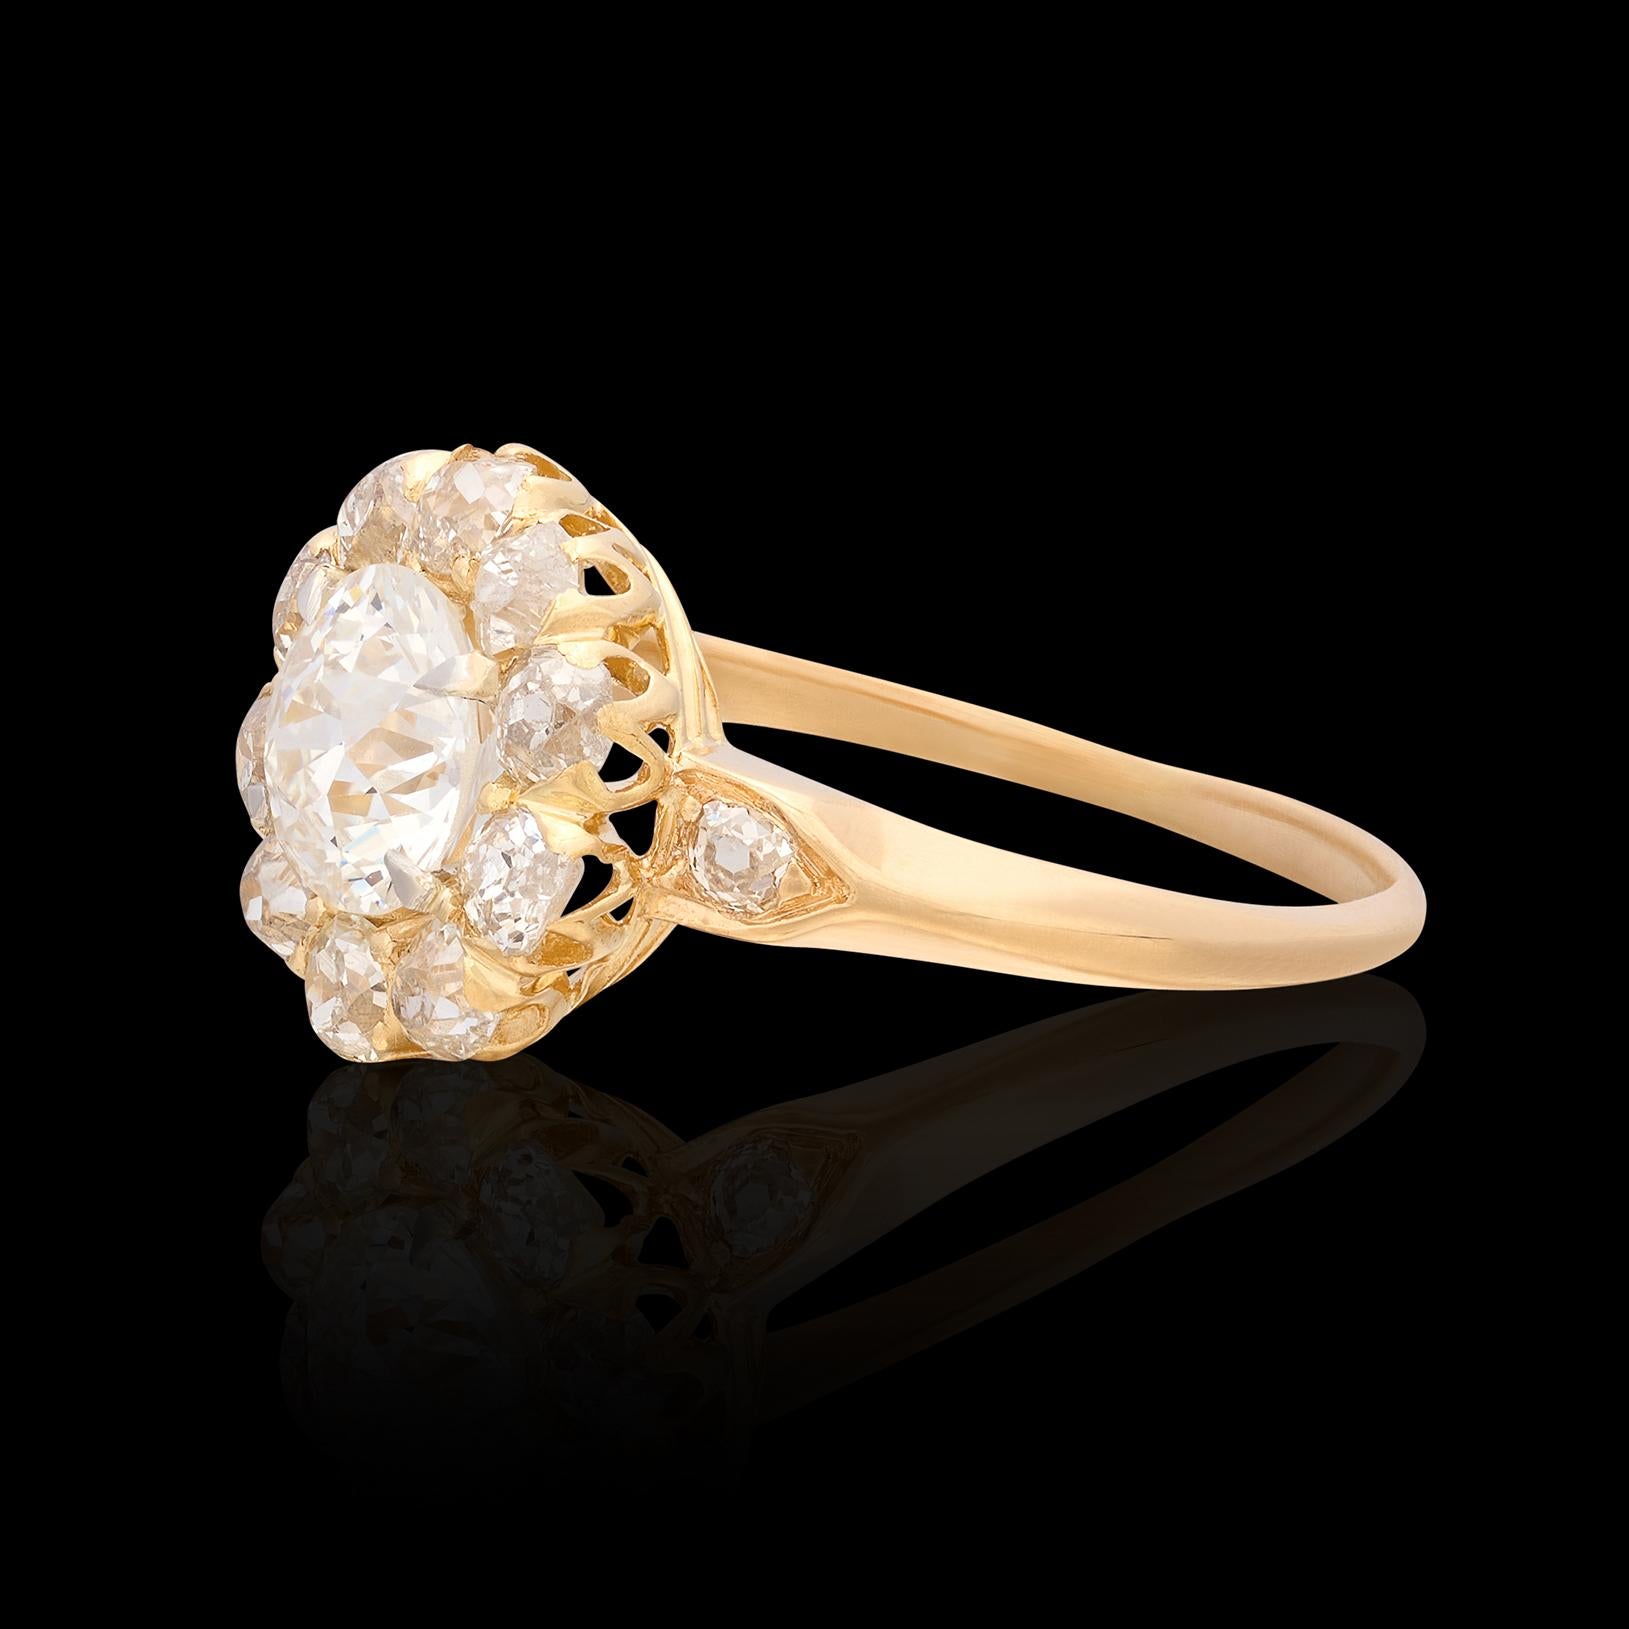 For Sale:  GIA 1.01-ct. Diamond & 18k Gold Antique Ring 5